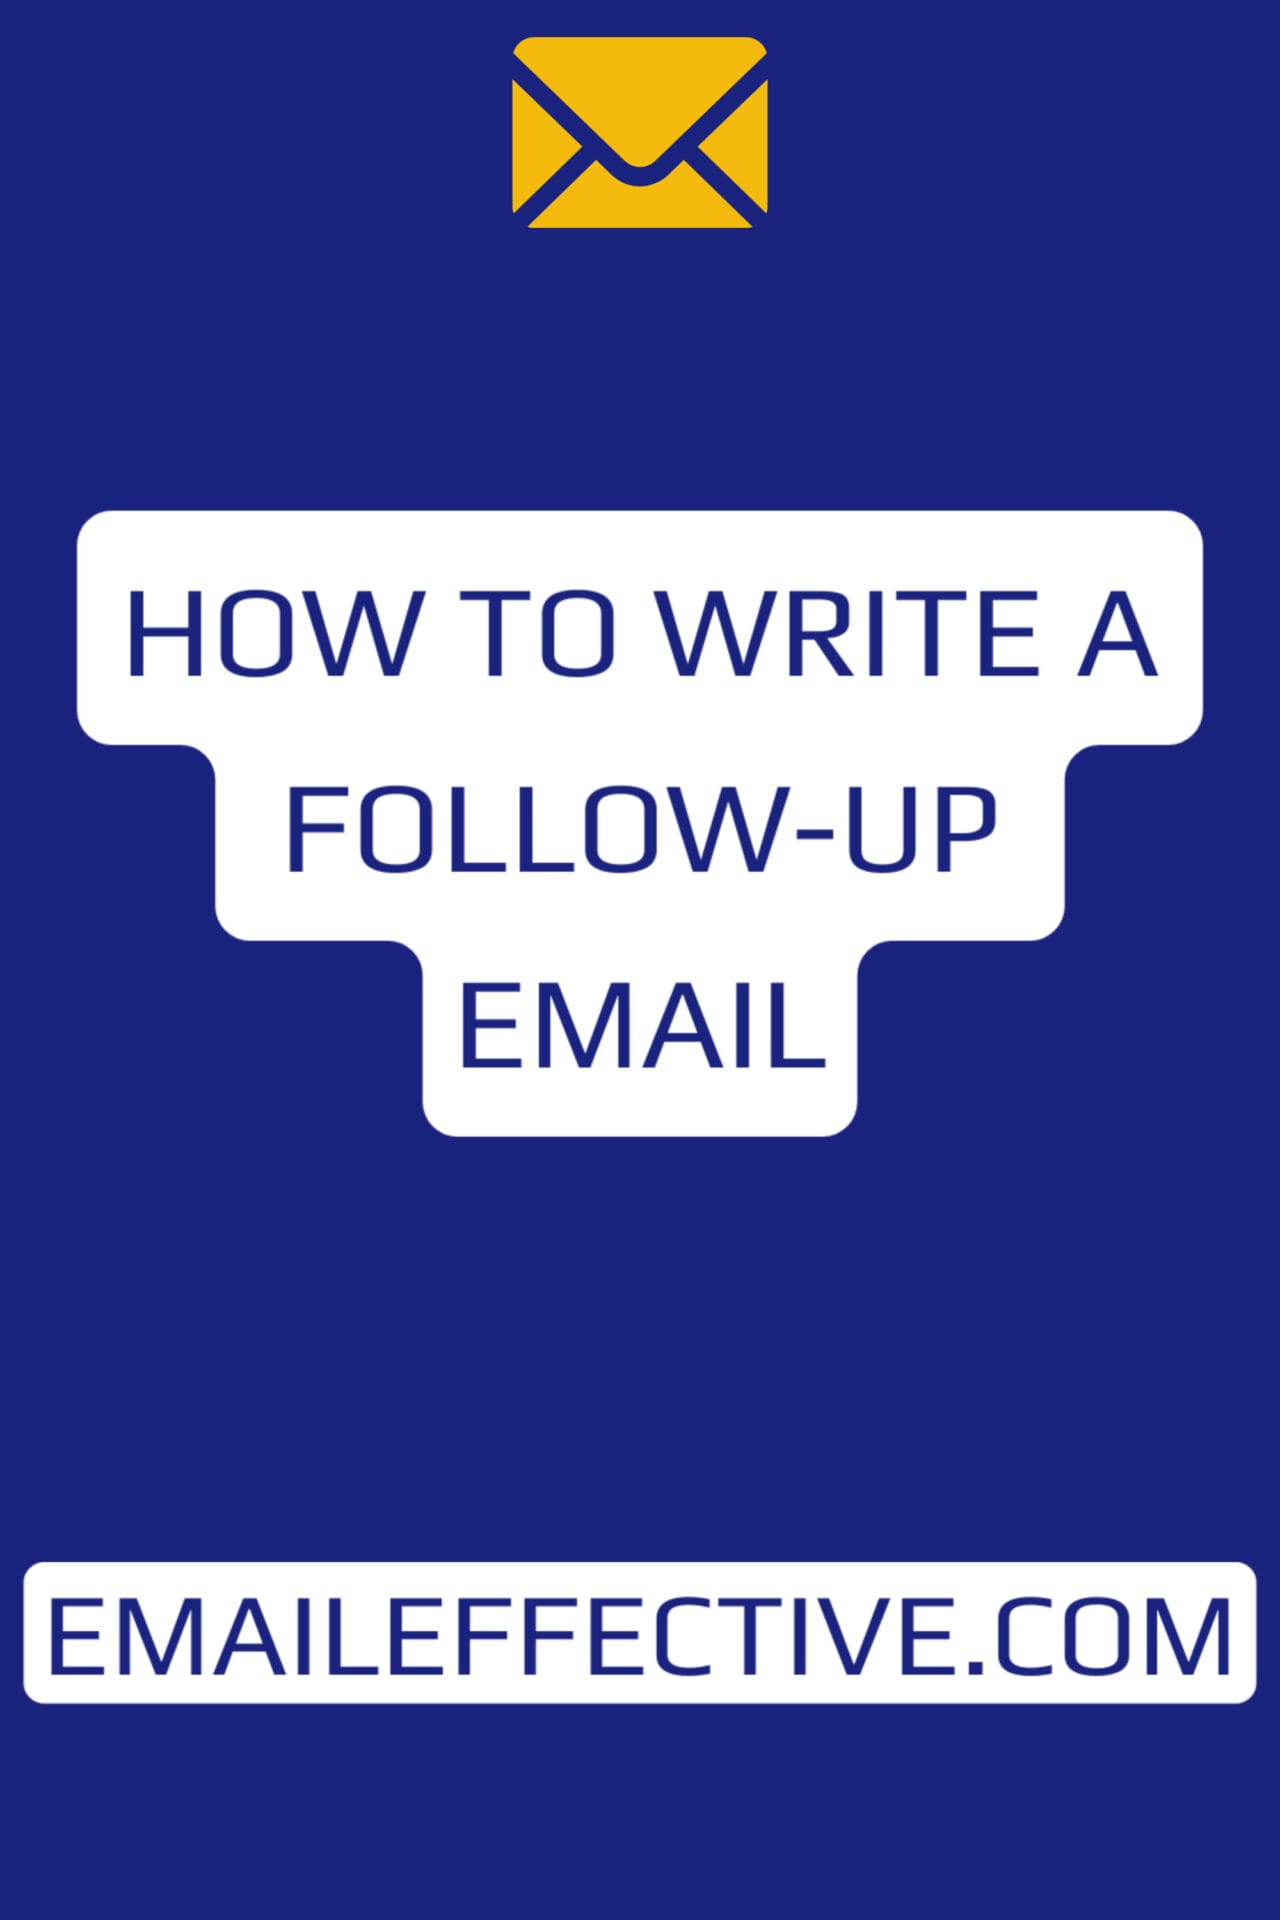 How to Write a Follow-Up Email